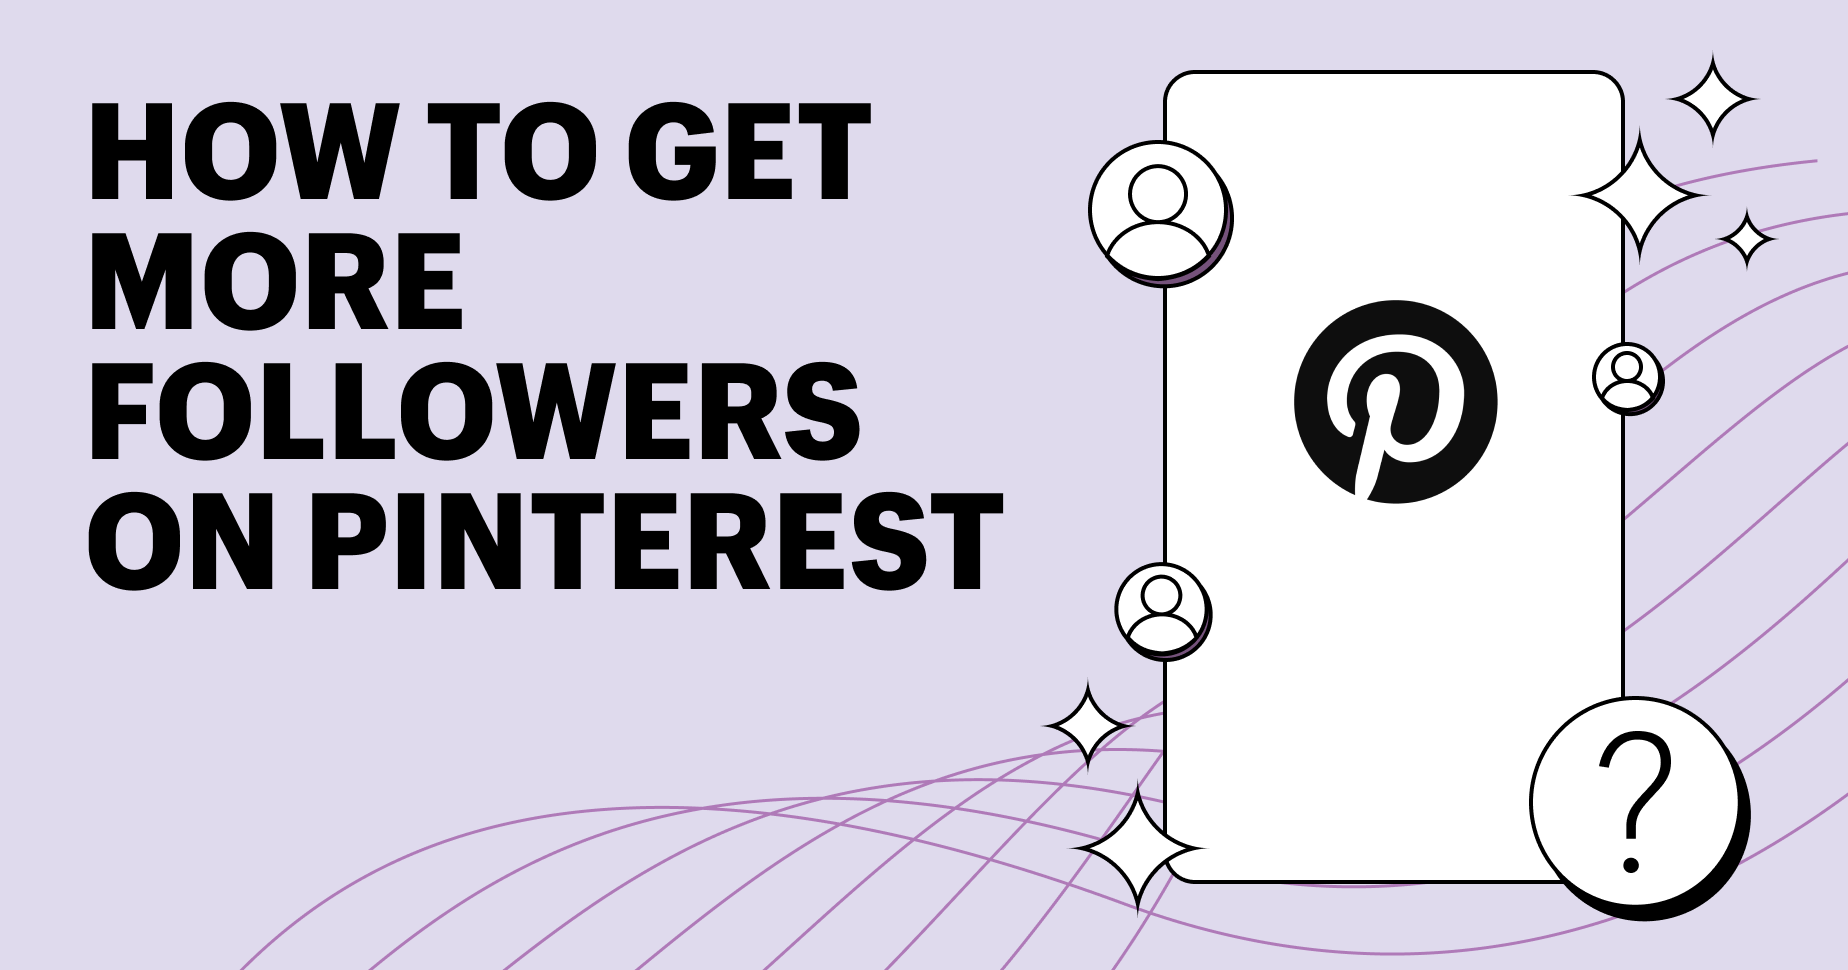 Graphic that says "how to get more followers on pinterest" on the left. On the right is a mobile phone with the Pinterest logo centered.